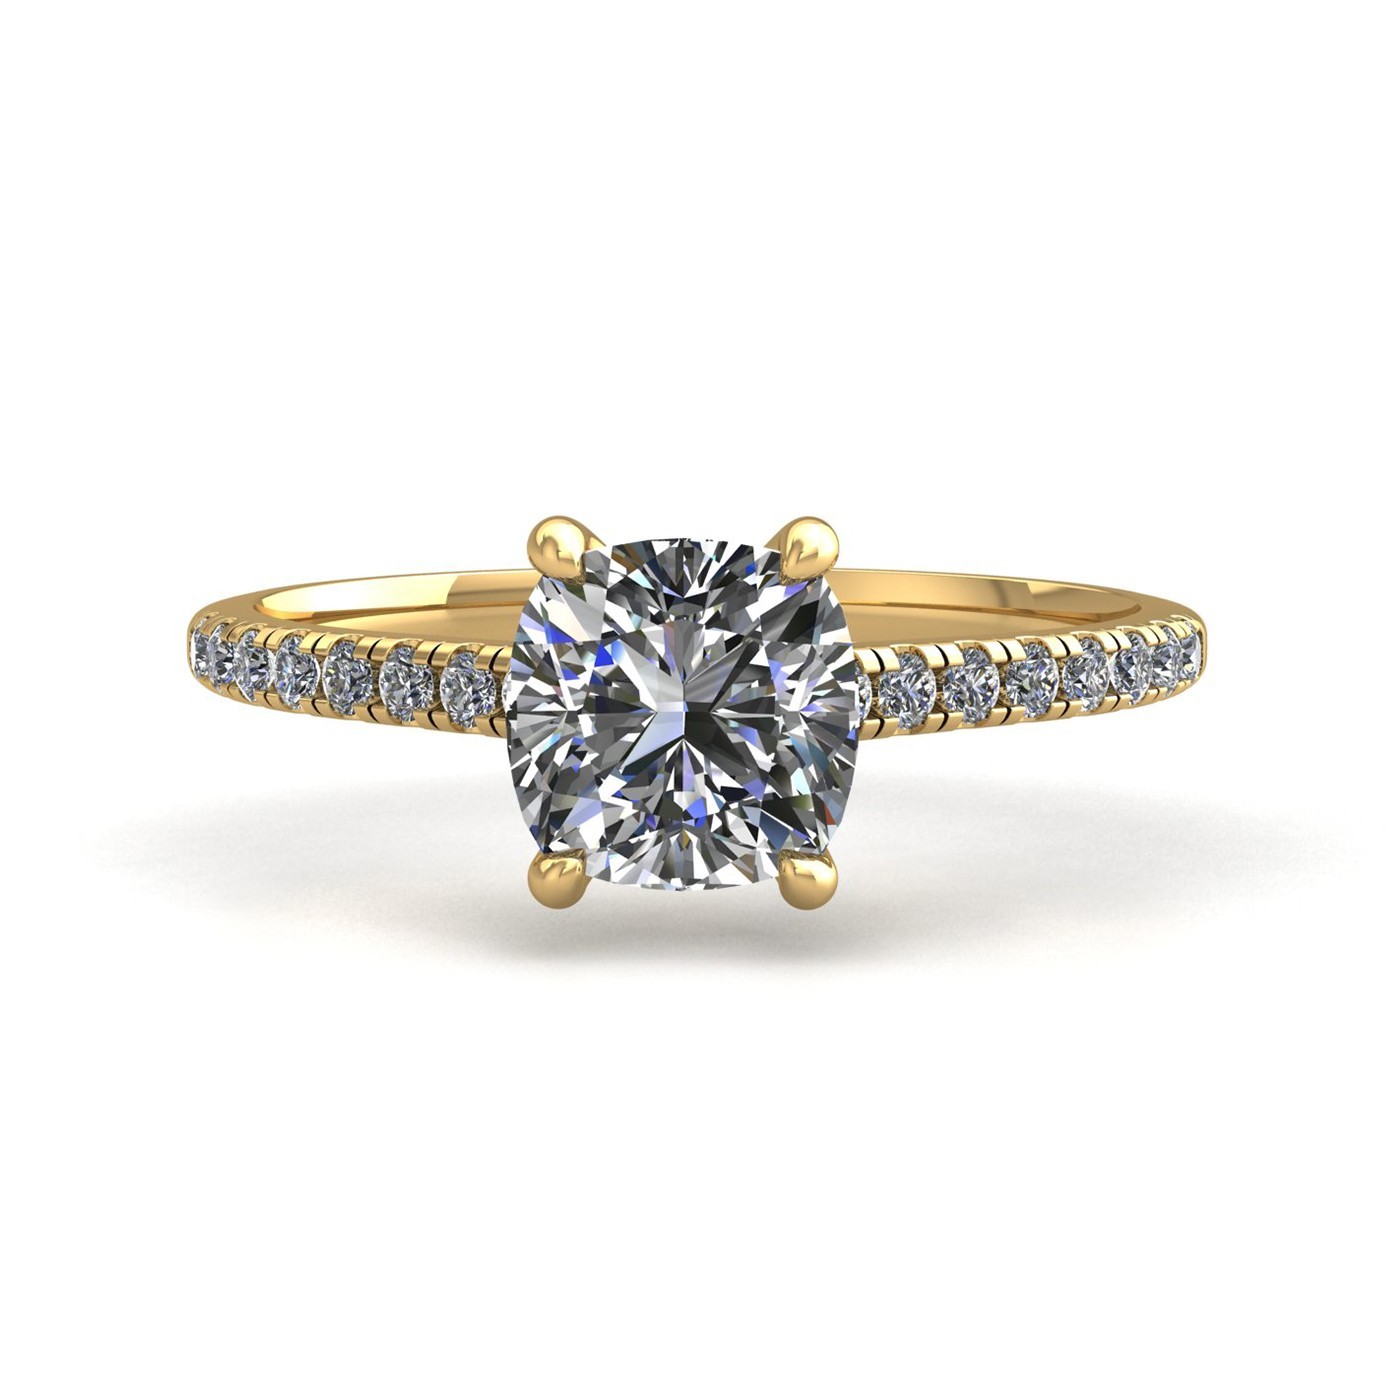 18k yellow gold  0,30 ct 4 prongs cushion cut diamond engagement ring with whisper thin pavÉ set band Photos & images